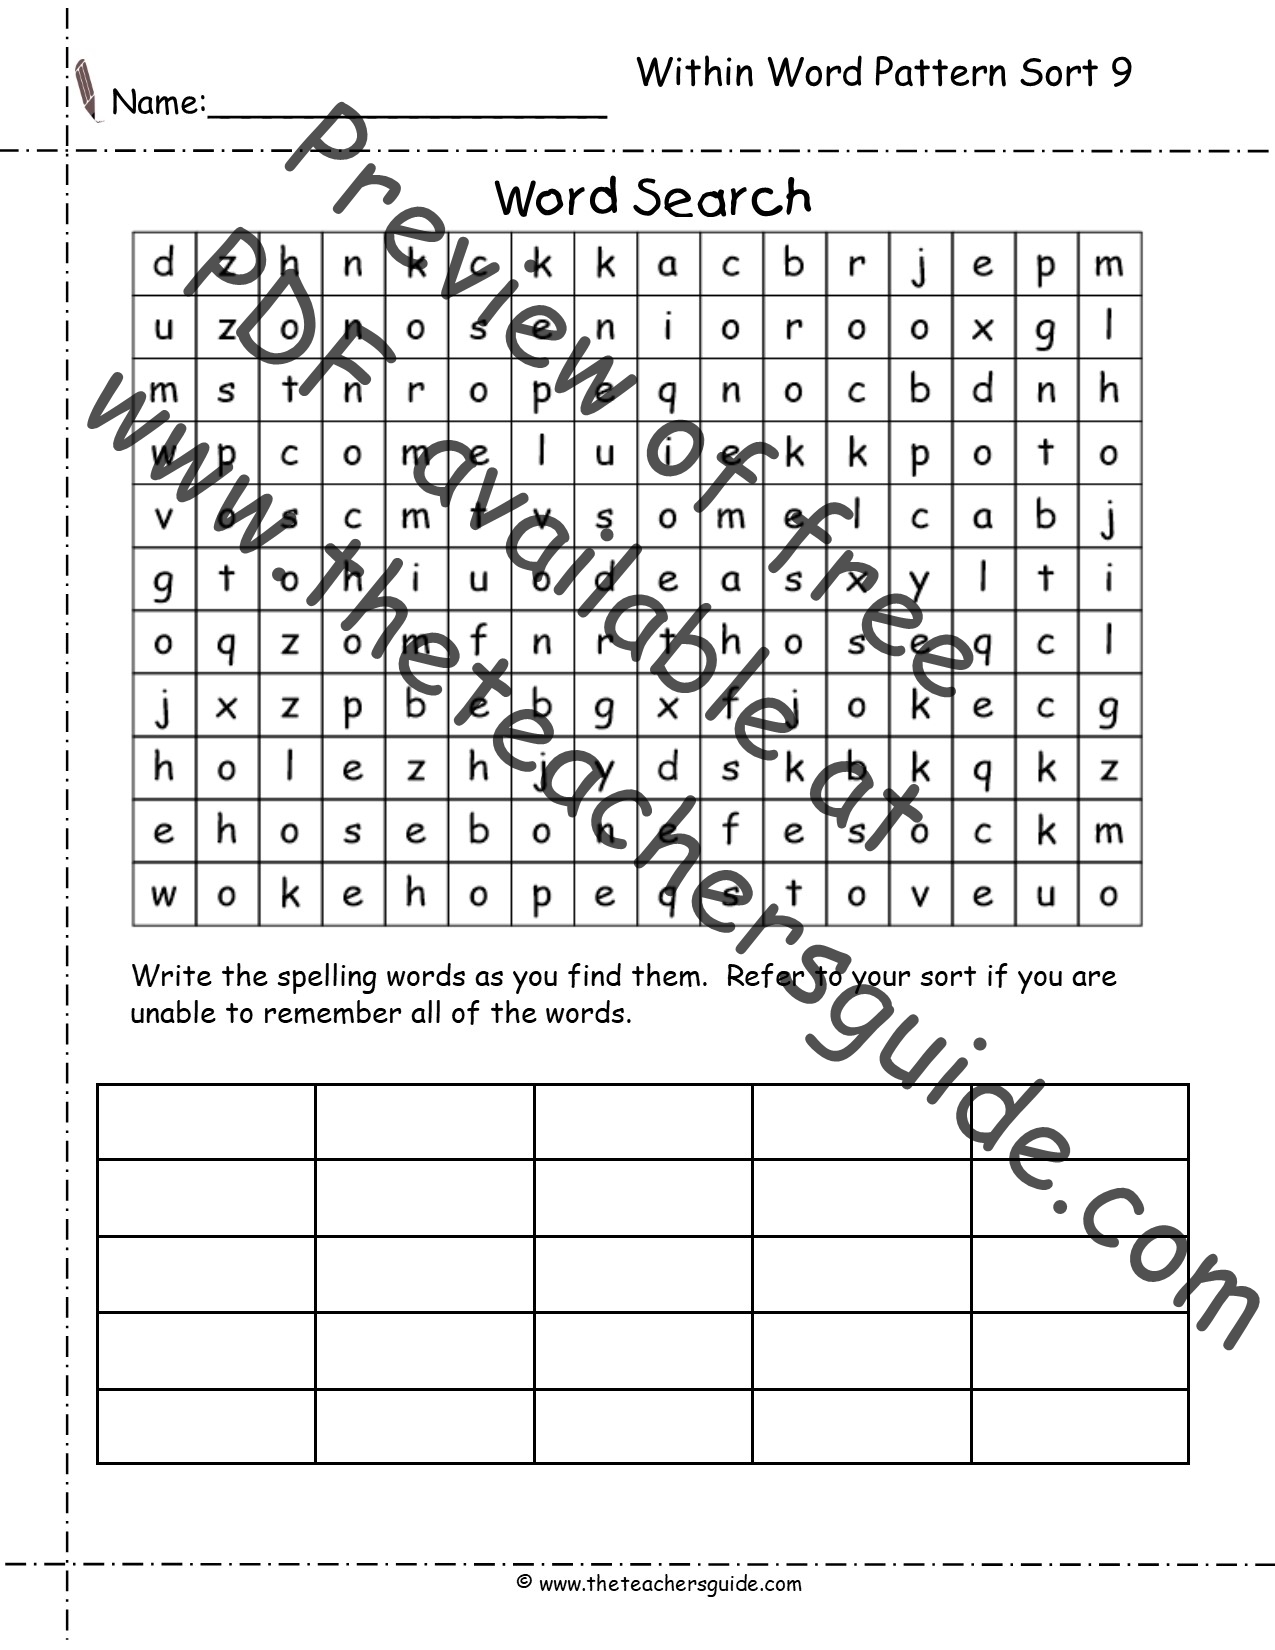 Words Their Way Within Word Patterns Worksheets Intended For Words Their Way Blank Sort Template